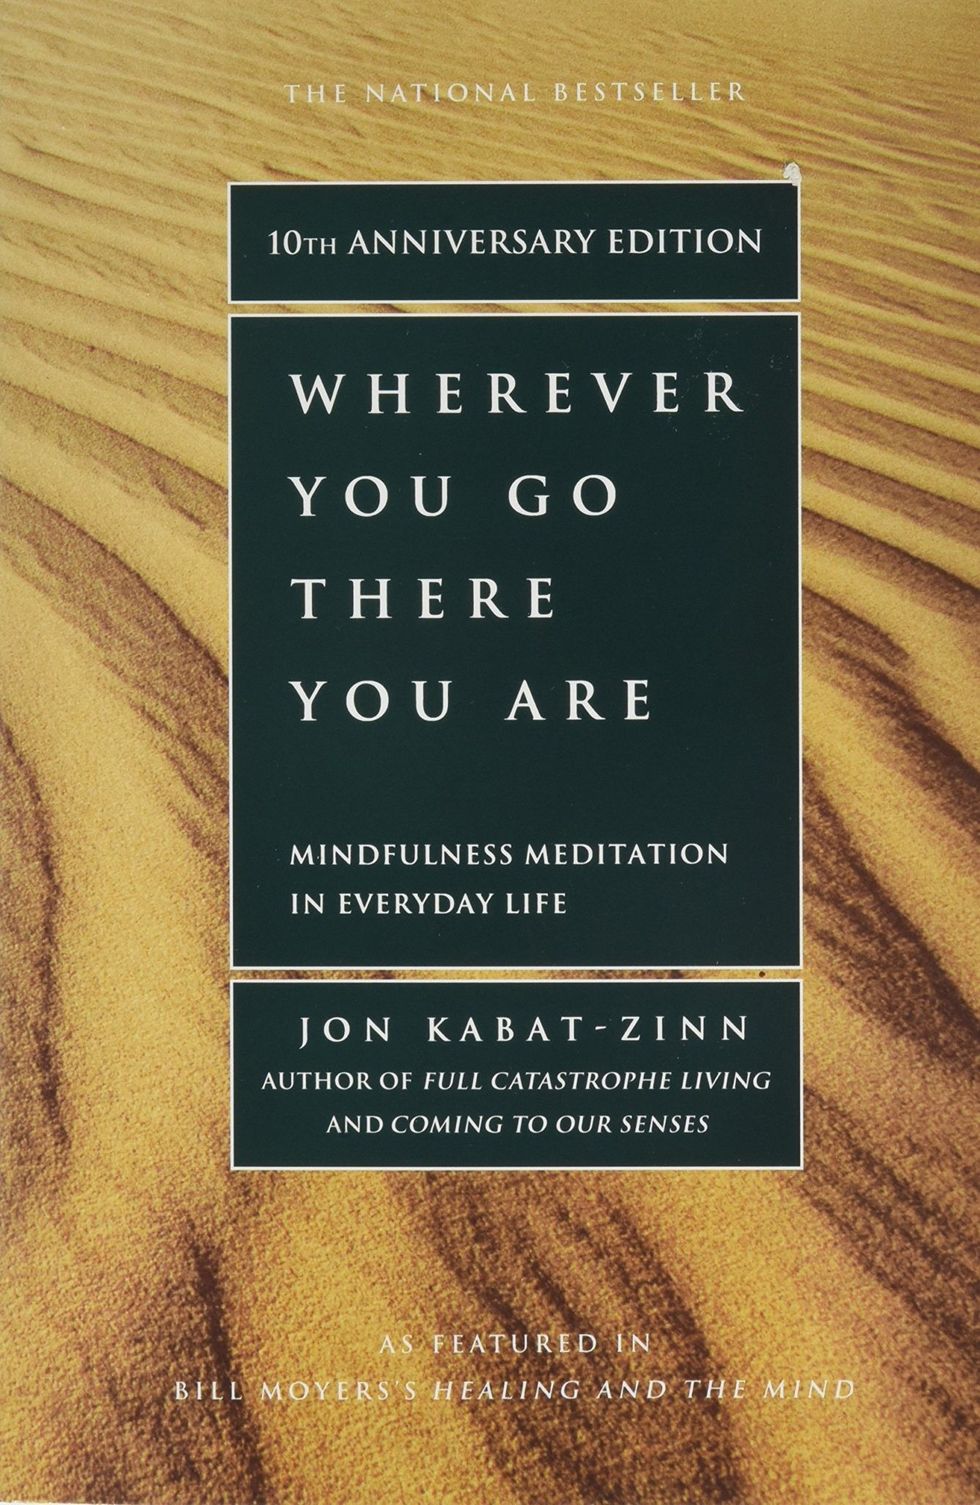 Wherever-You-Go-there-You-Are-meditation-book-Jon-Kabat-Zinn